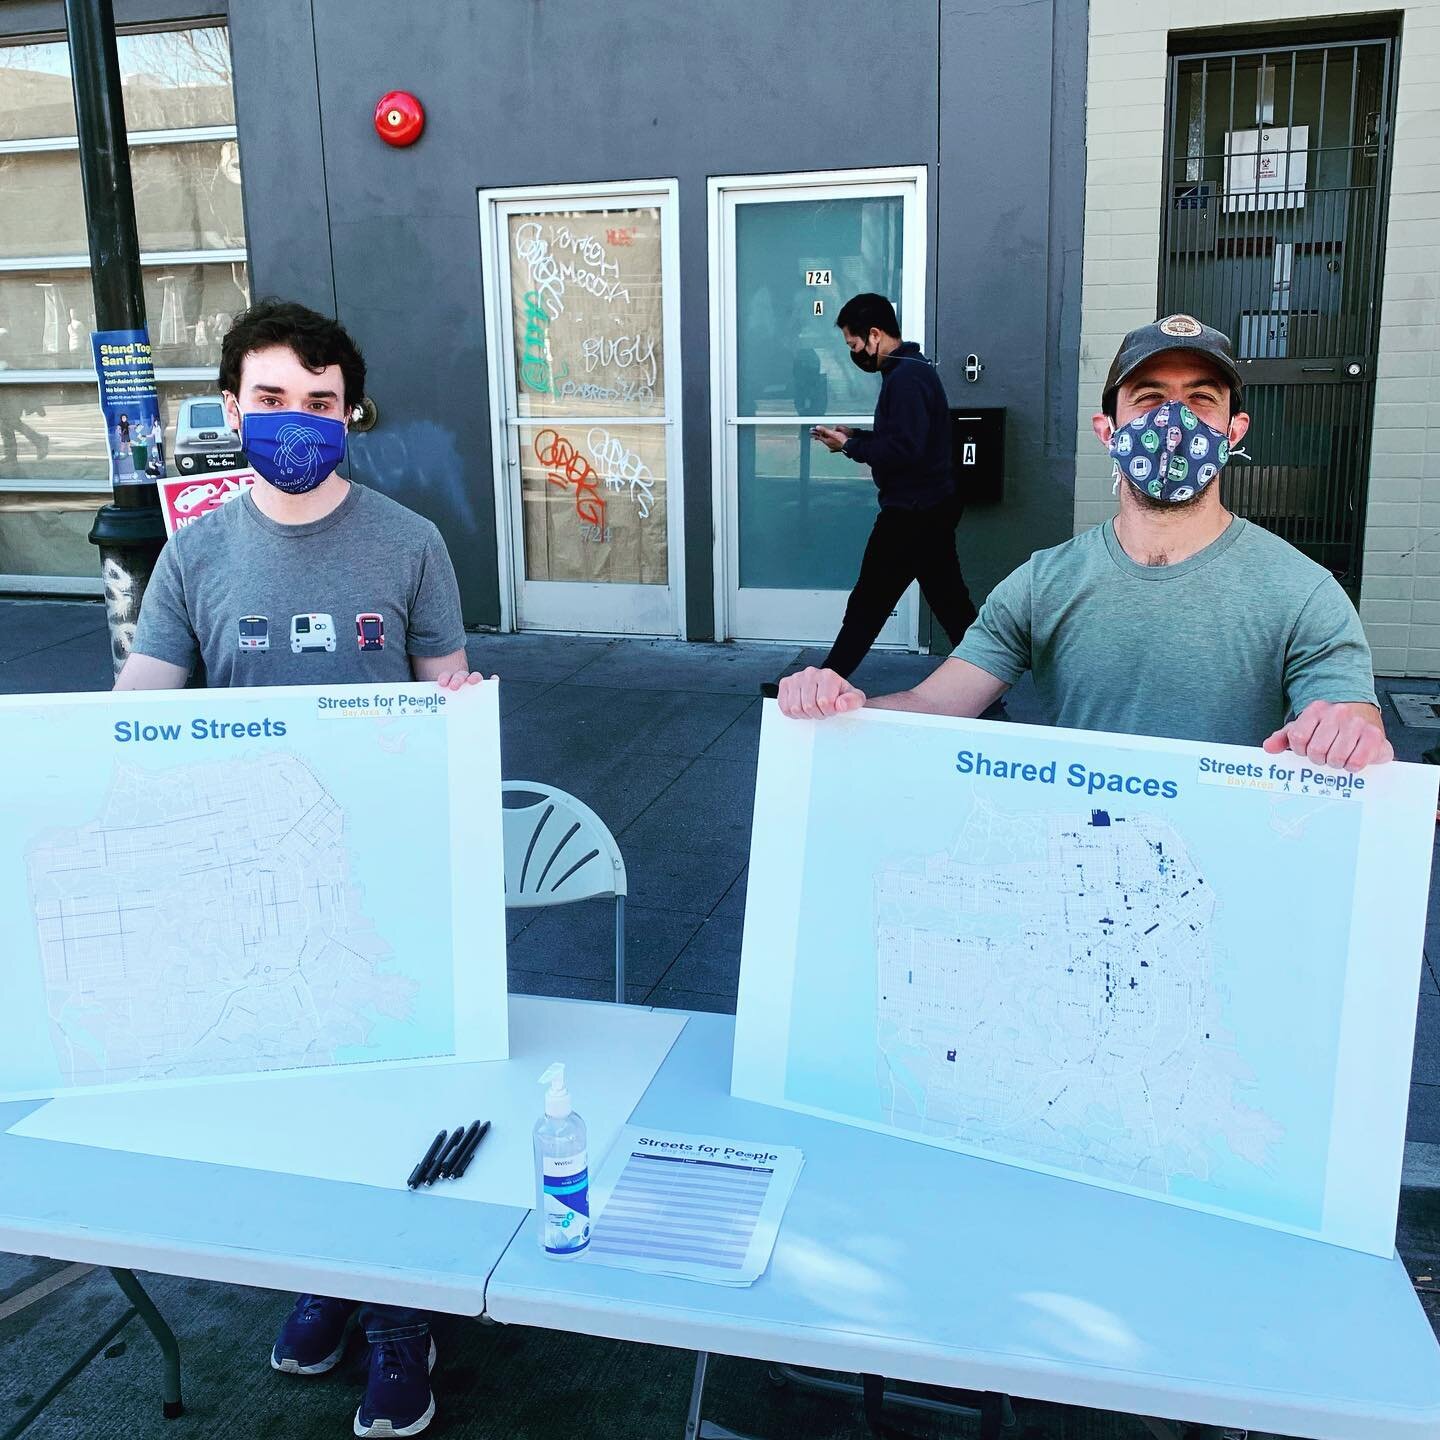 We&rsquo;ve been out on Valencia St asking people what they think about slow streets and shared spaces, how they could be improved, and how we can help make them permanent. Join our campaign to repurpose street space for people rather than cars!